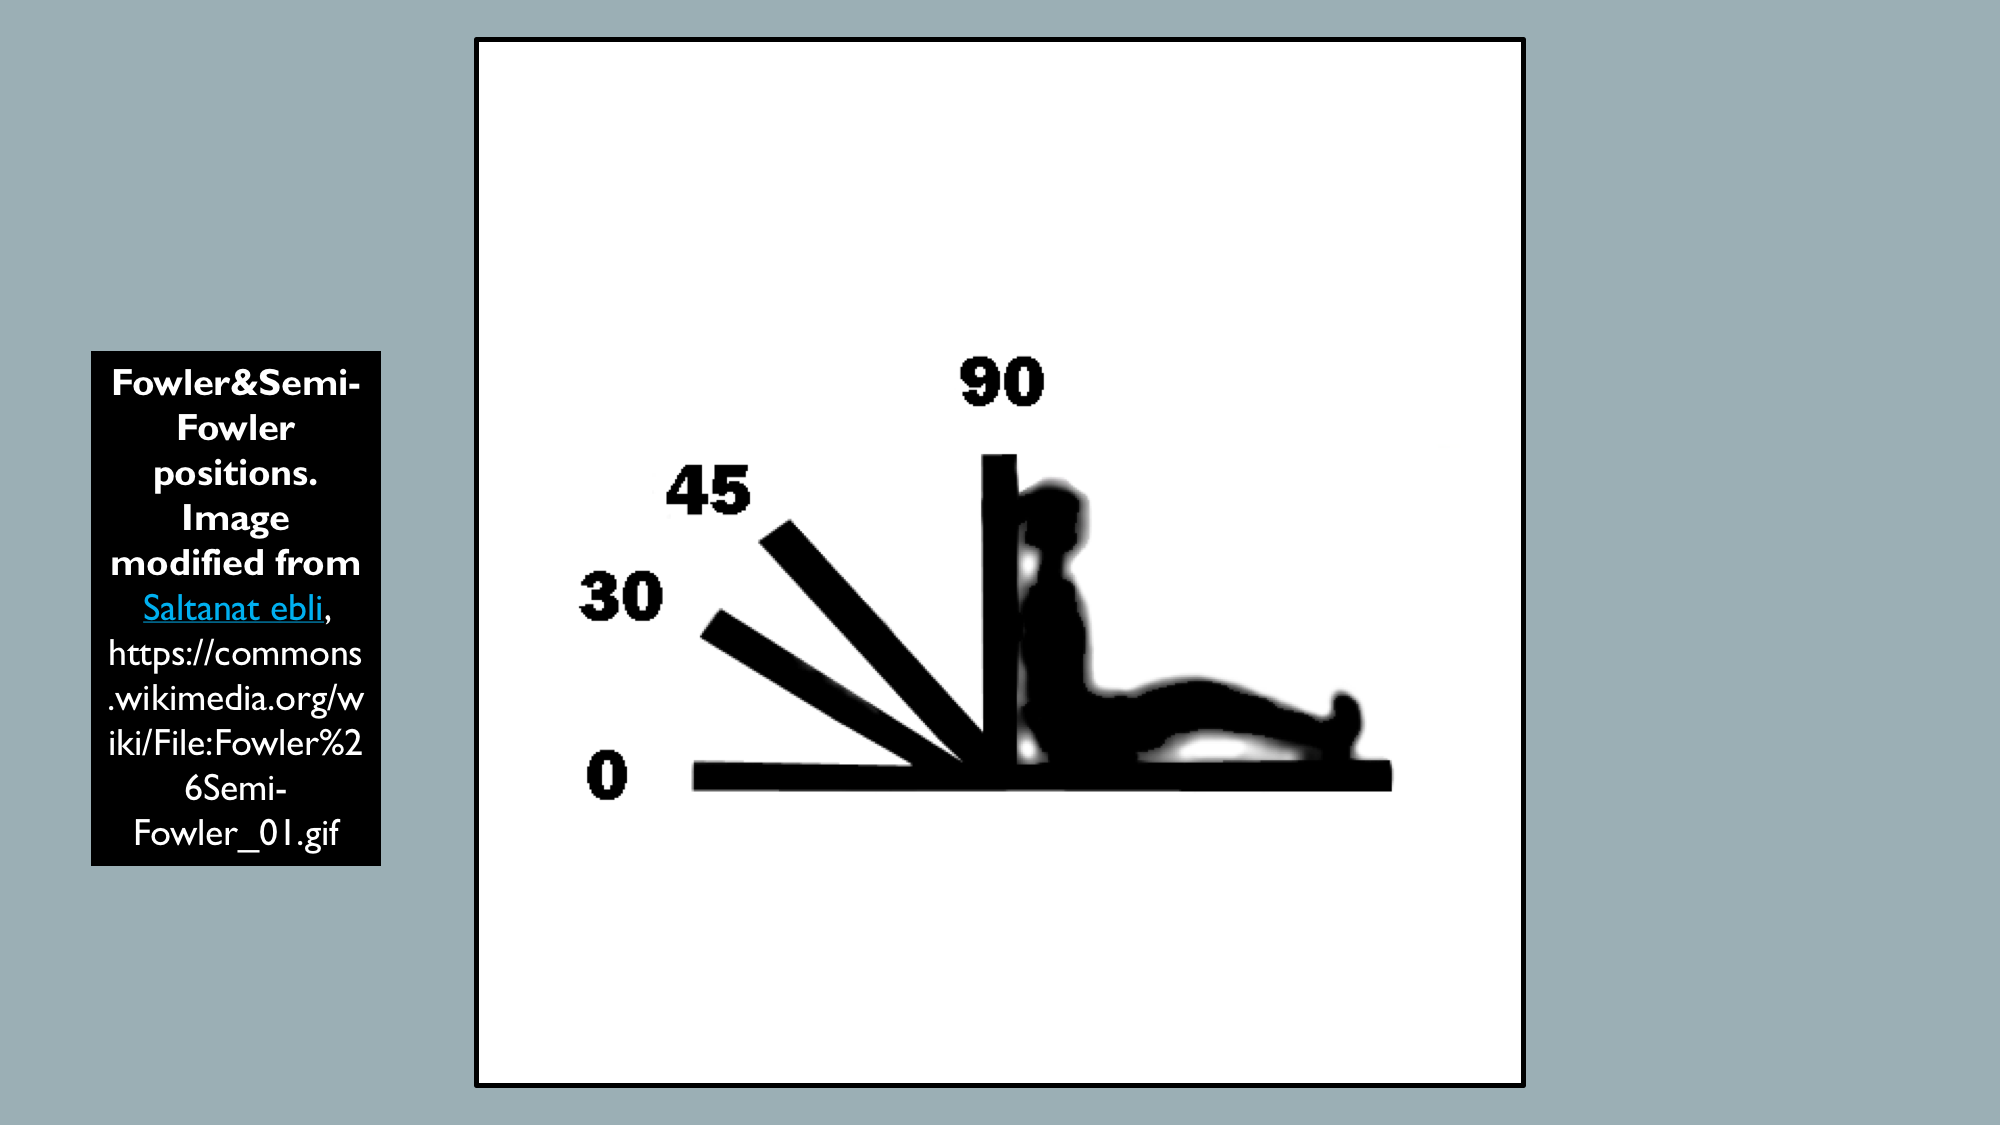 Fowler and Semi-Fowler positions, Full upright at 90 degree angle is High/Full Fowler's and tilted back at 30-45 degree angle is Semi-Fowler's position